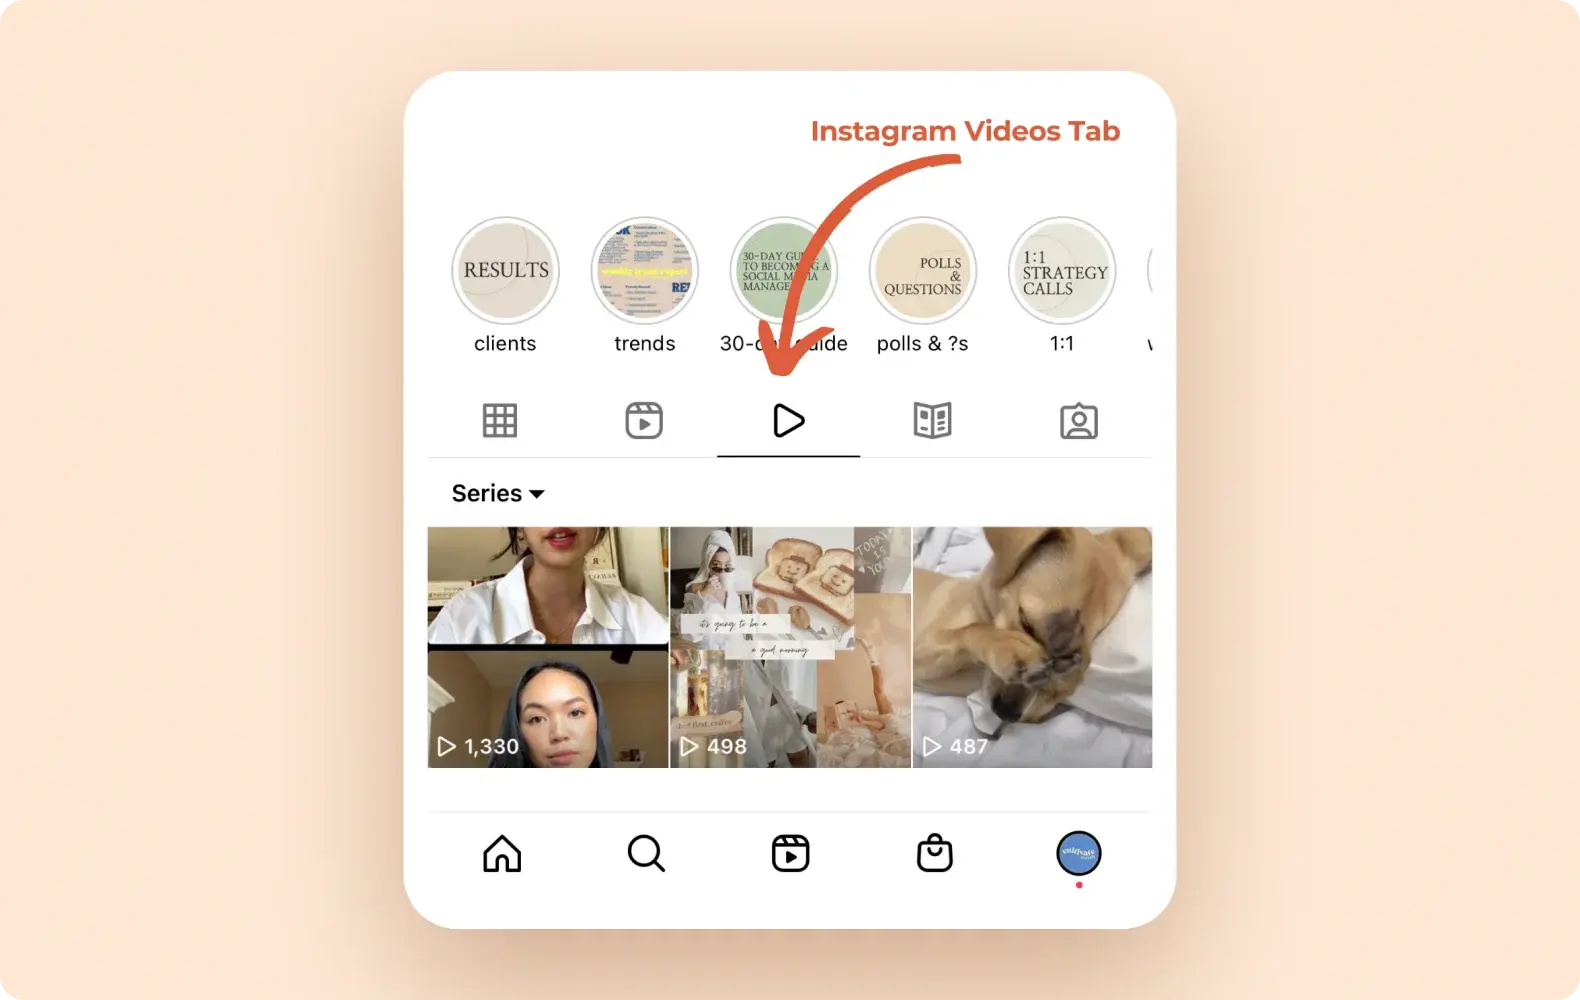 Information about where to find Instagram Videos on an Instagram home page.